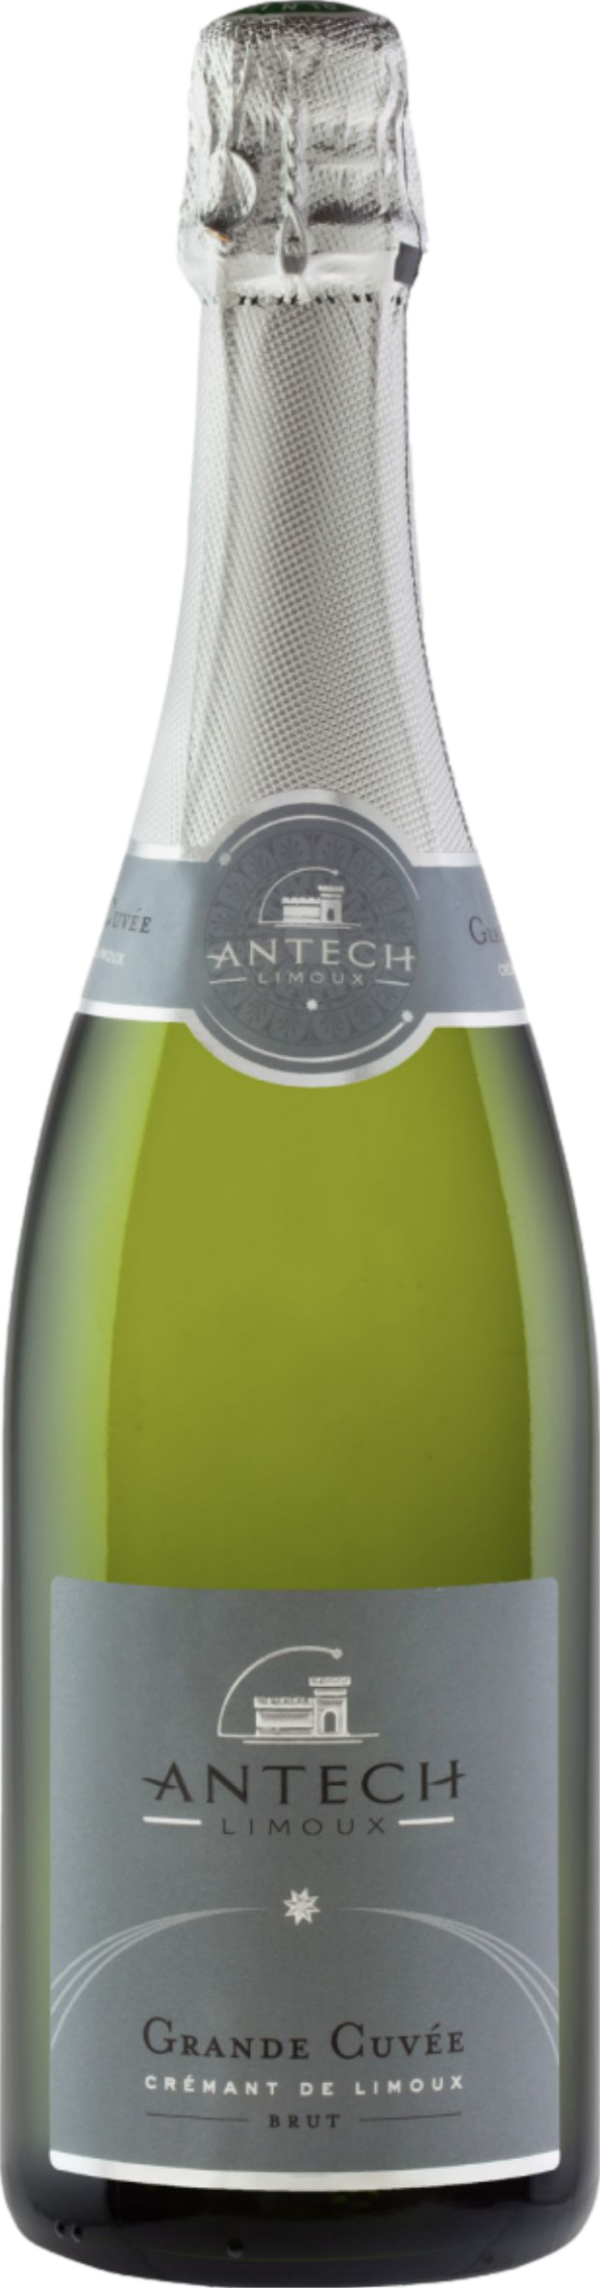 Product image of Antech Grande Cuvee Cremant de Limoux Brut 2020 from 8wines